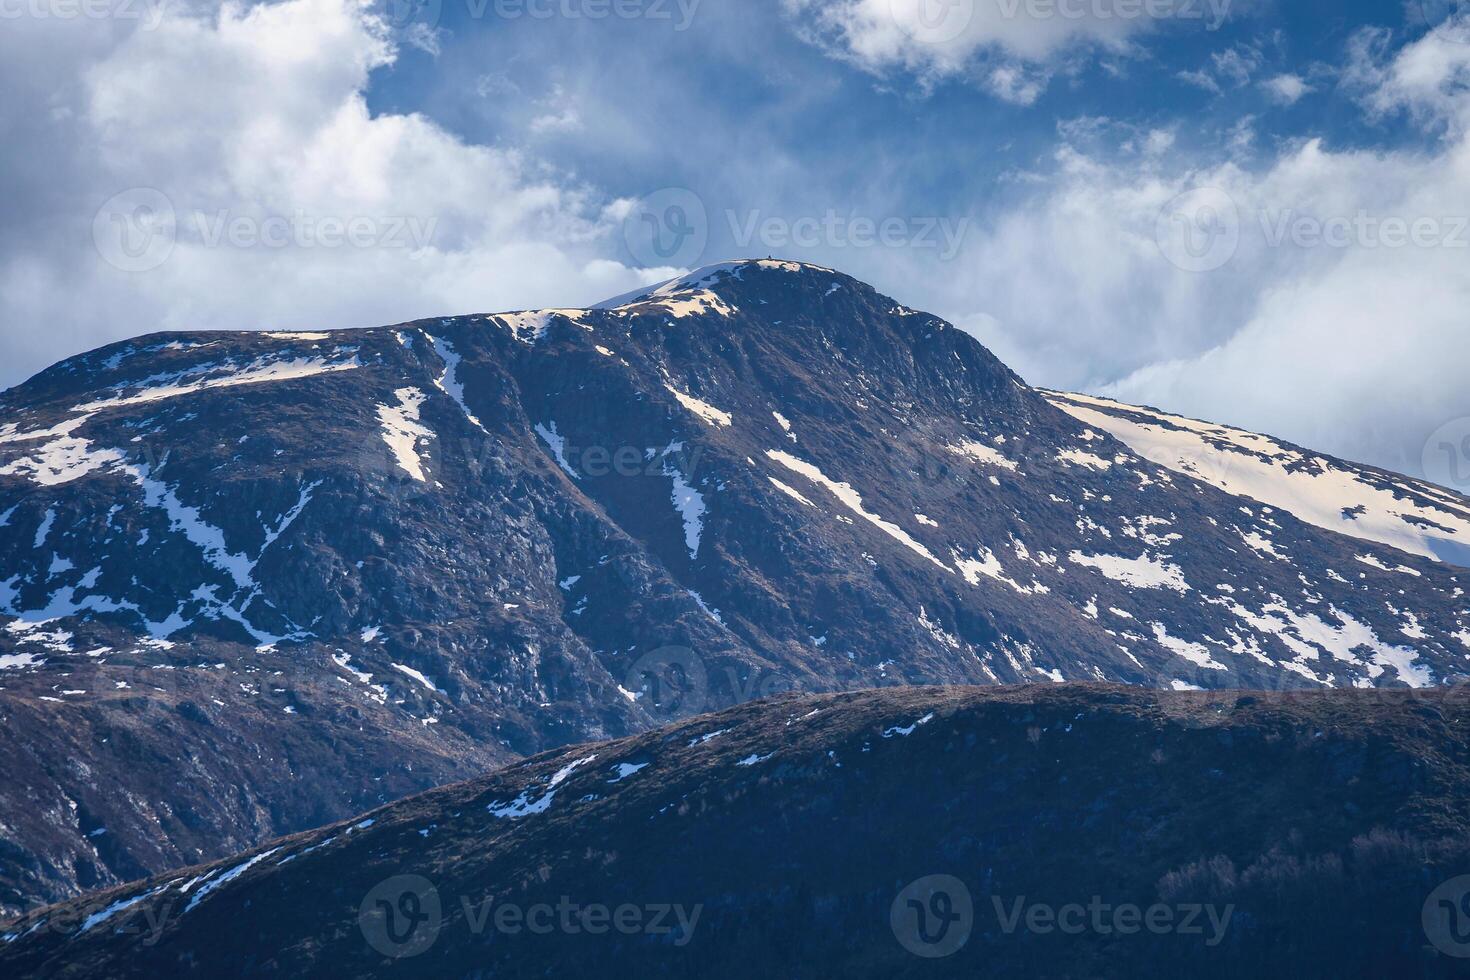 Western cap in Norway. Snow-covered mountain peaks. Very cloudy sky. Landscape photo